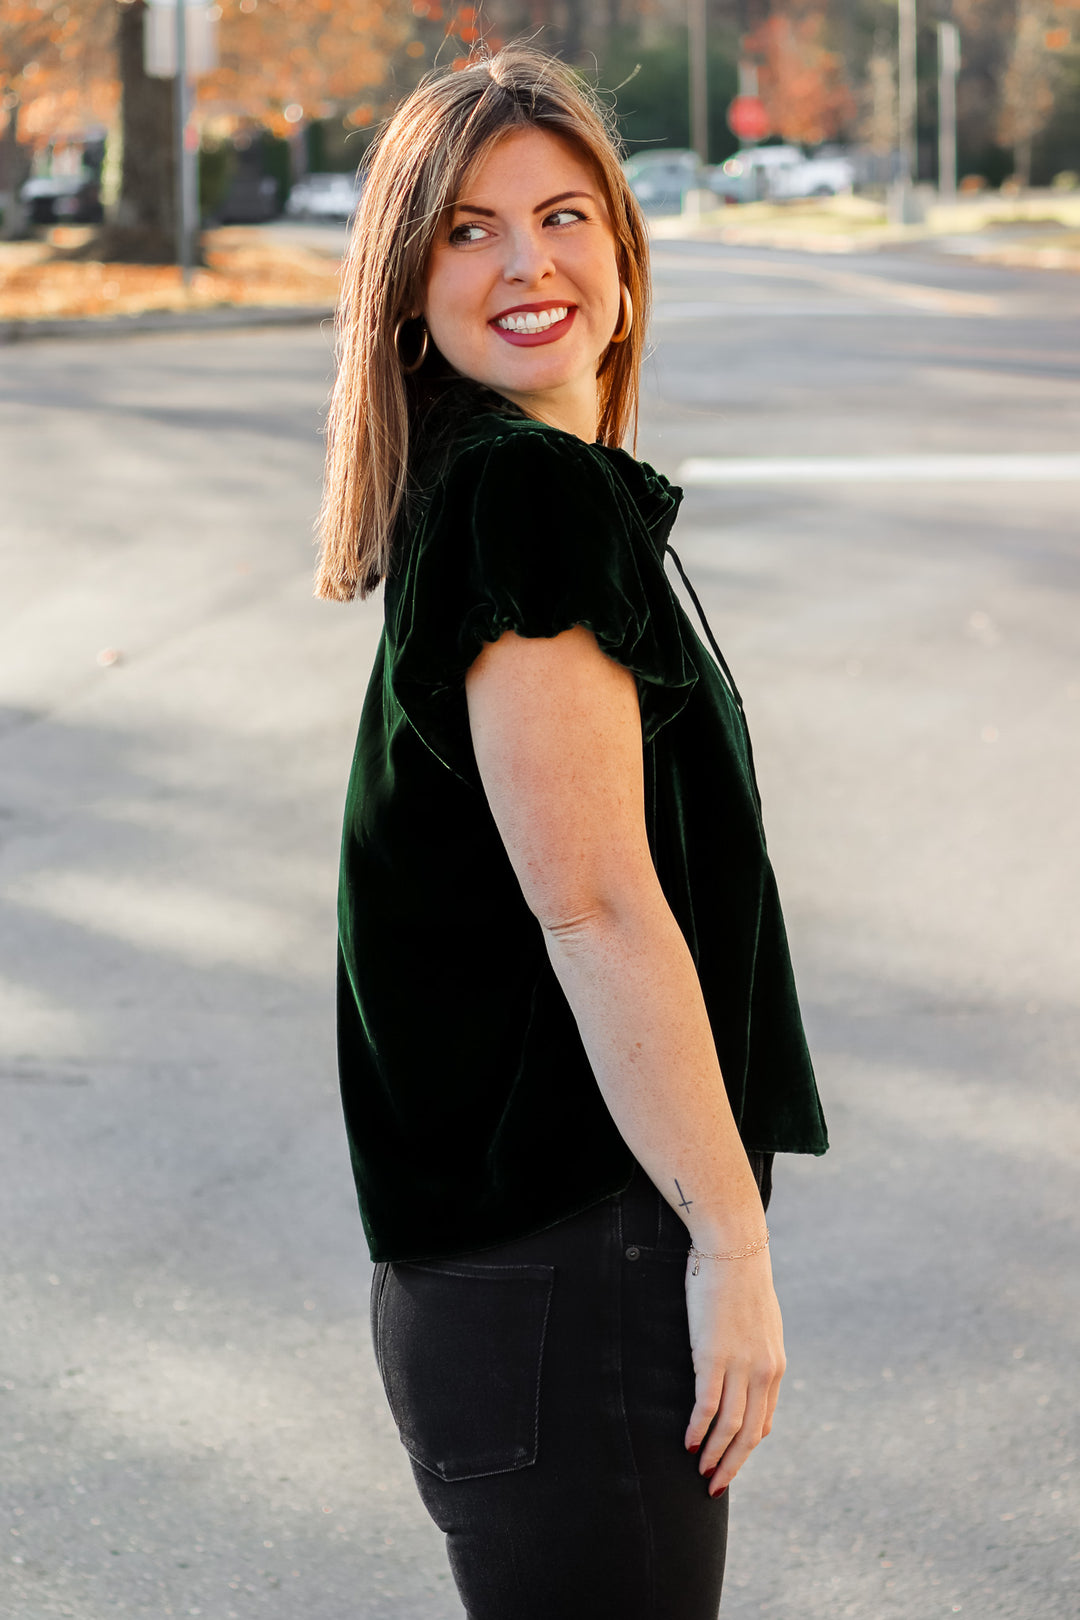 A brunette woman standing outside wearing a dark green velvet top with tie collar, short sleeves and black jeans.